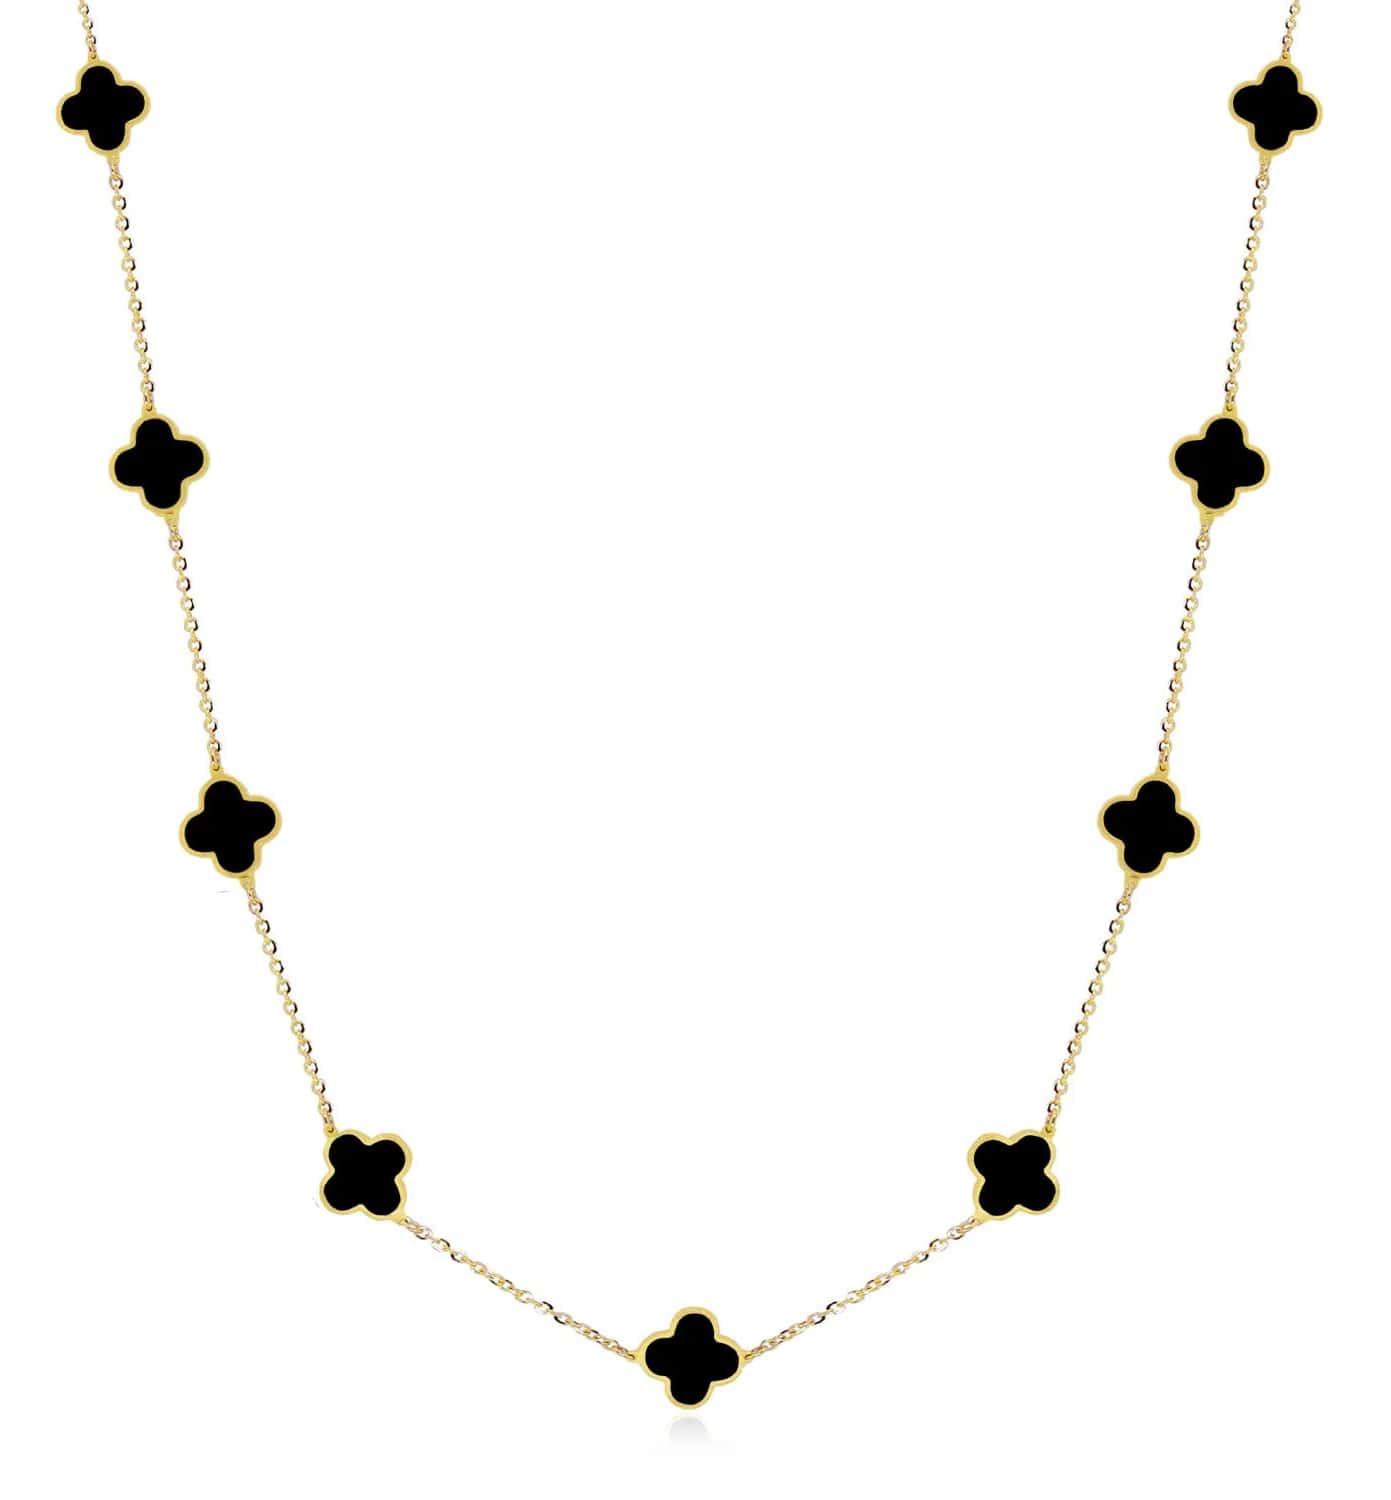 An image board of a Van Cleef necklace dupe from Lovery in black and gold